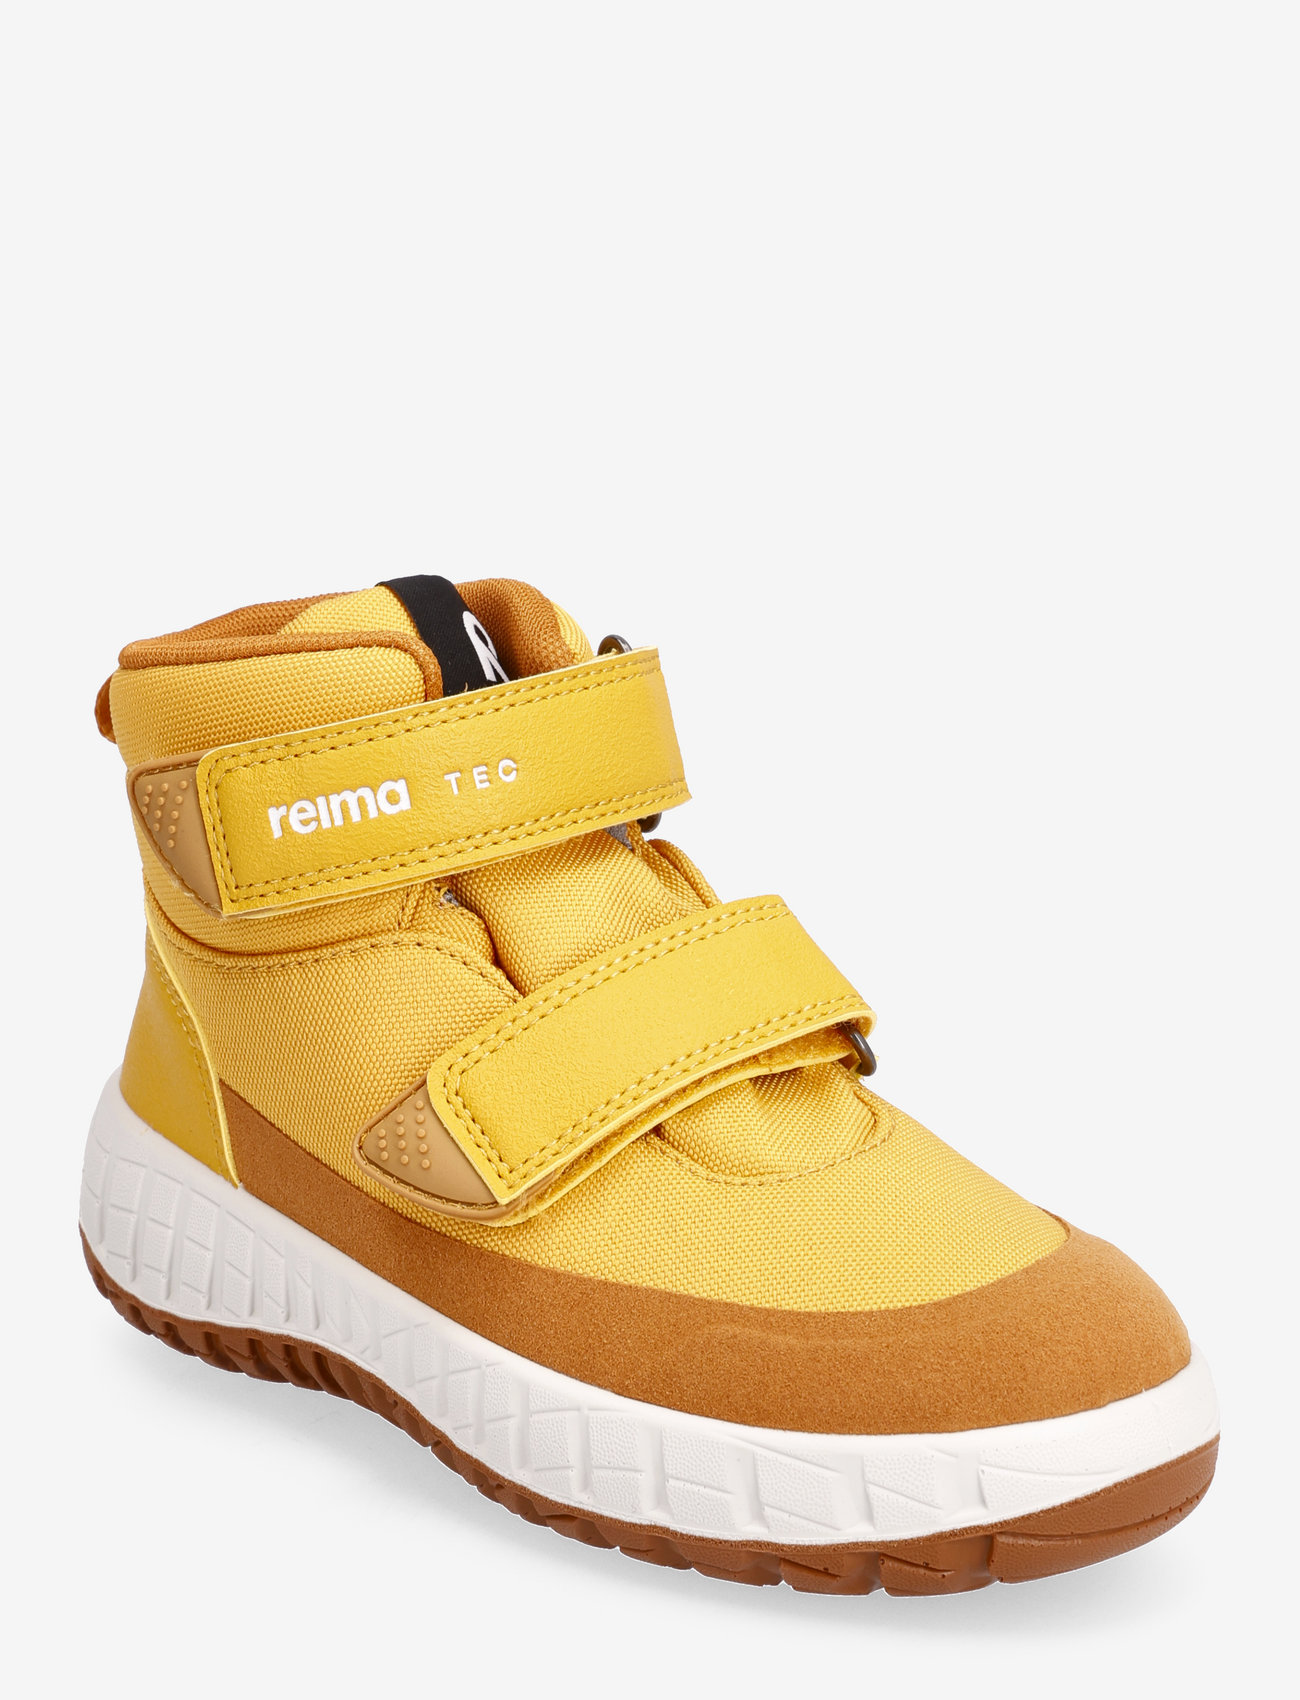 Reima - Reimatec shoes, Patter 2.0 - høje sneakers - ochre yellow - 0